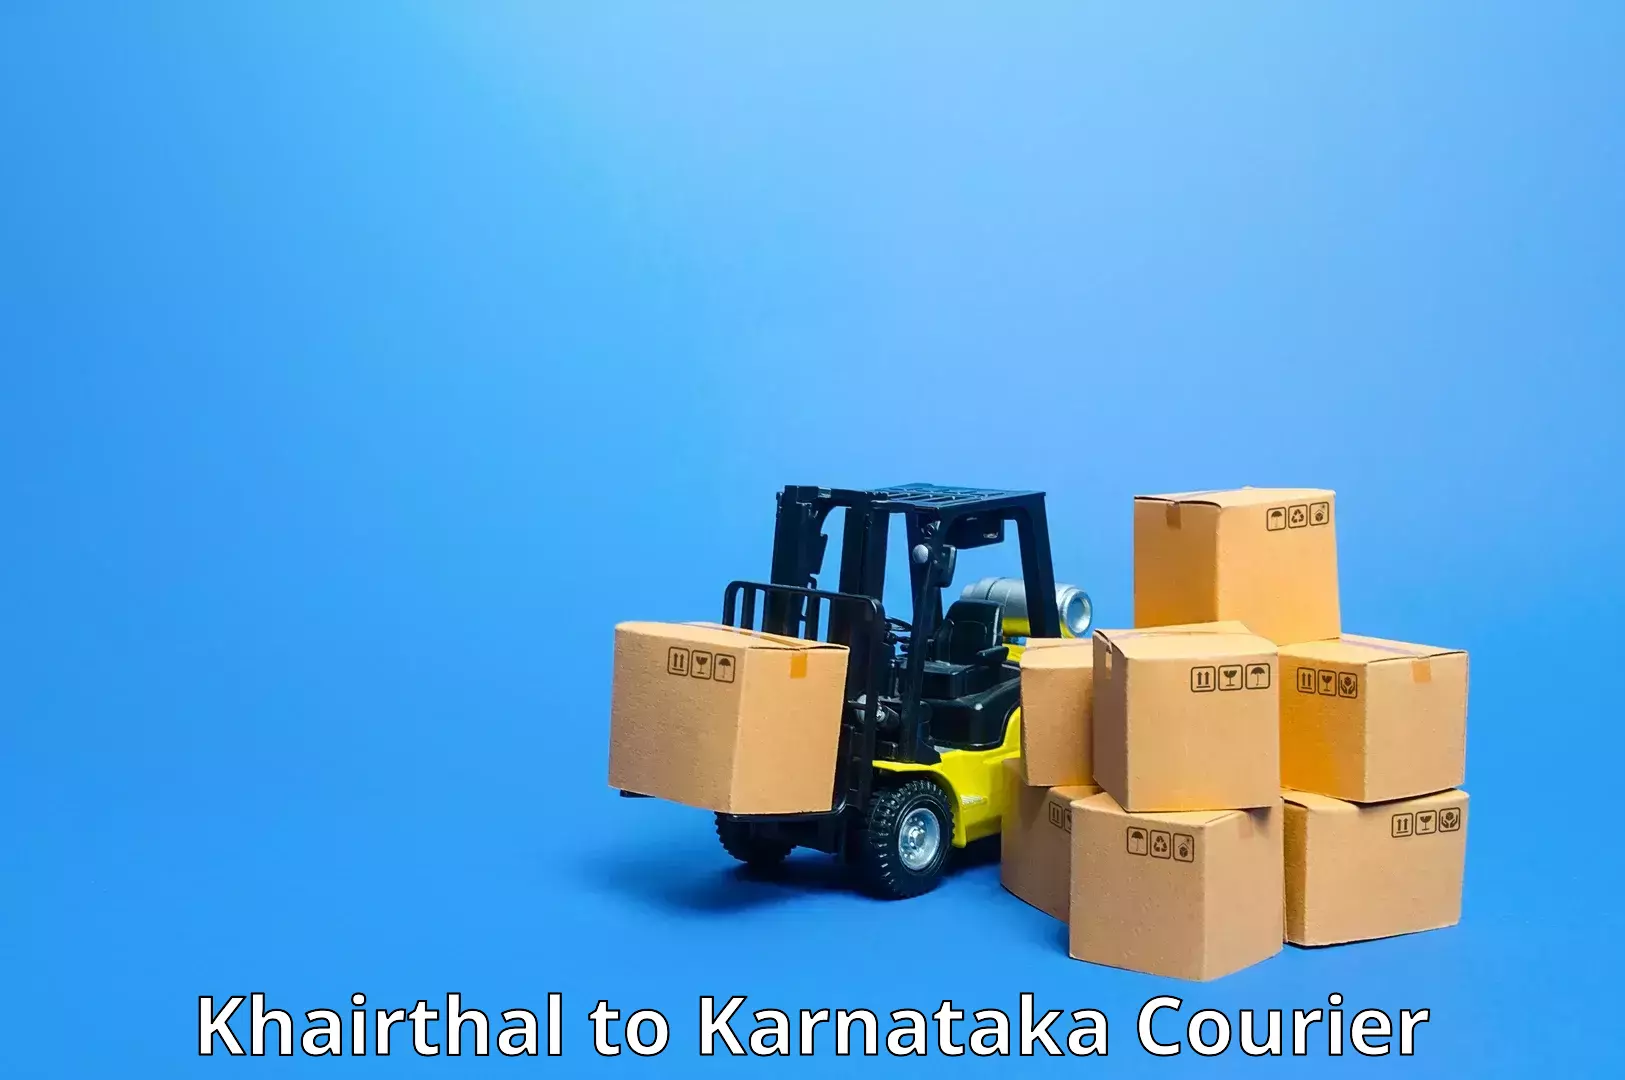 End-to-end delivery Khairthal to Yellapur